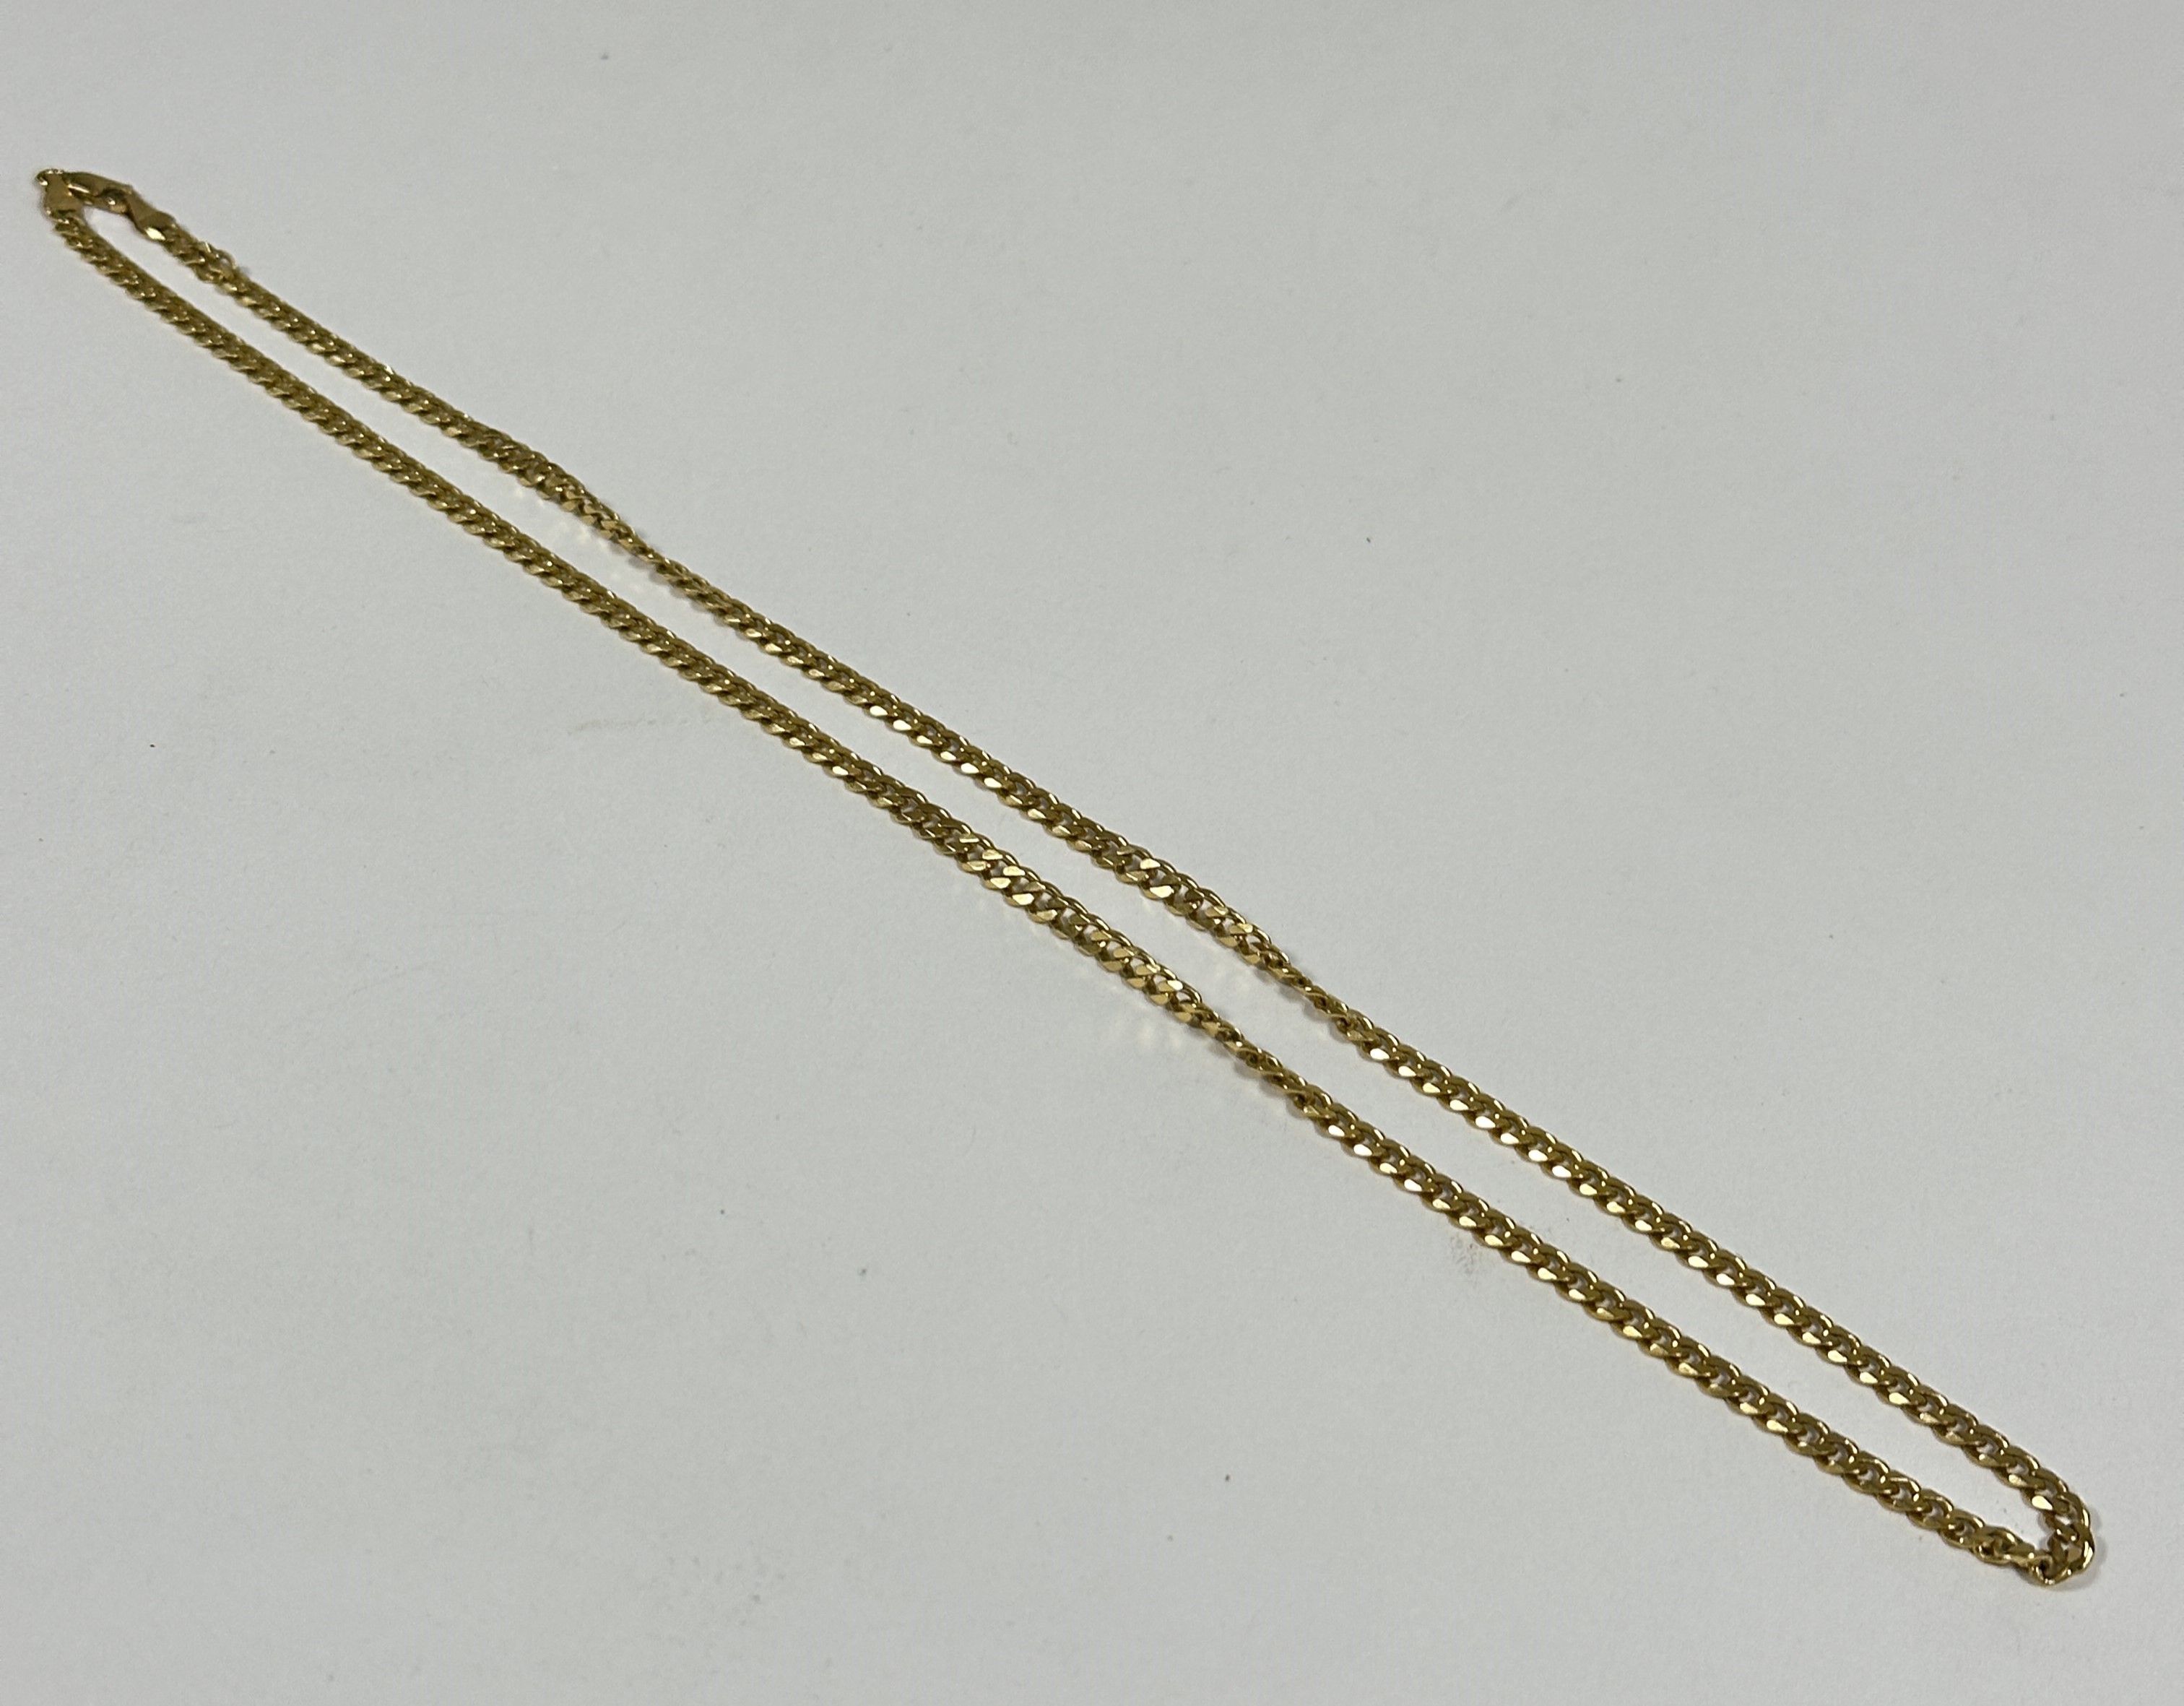 A 9ct gold kerb link necklace with lobster claw clasp fastening, no signs of damage, hard solder